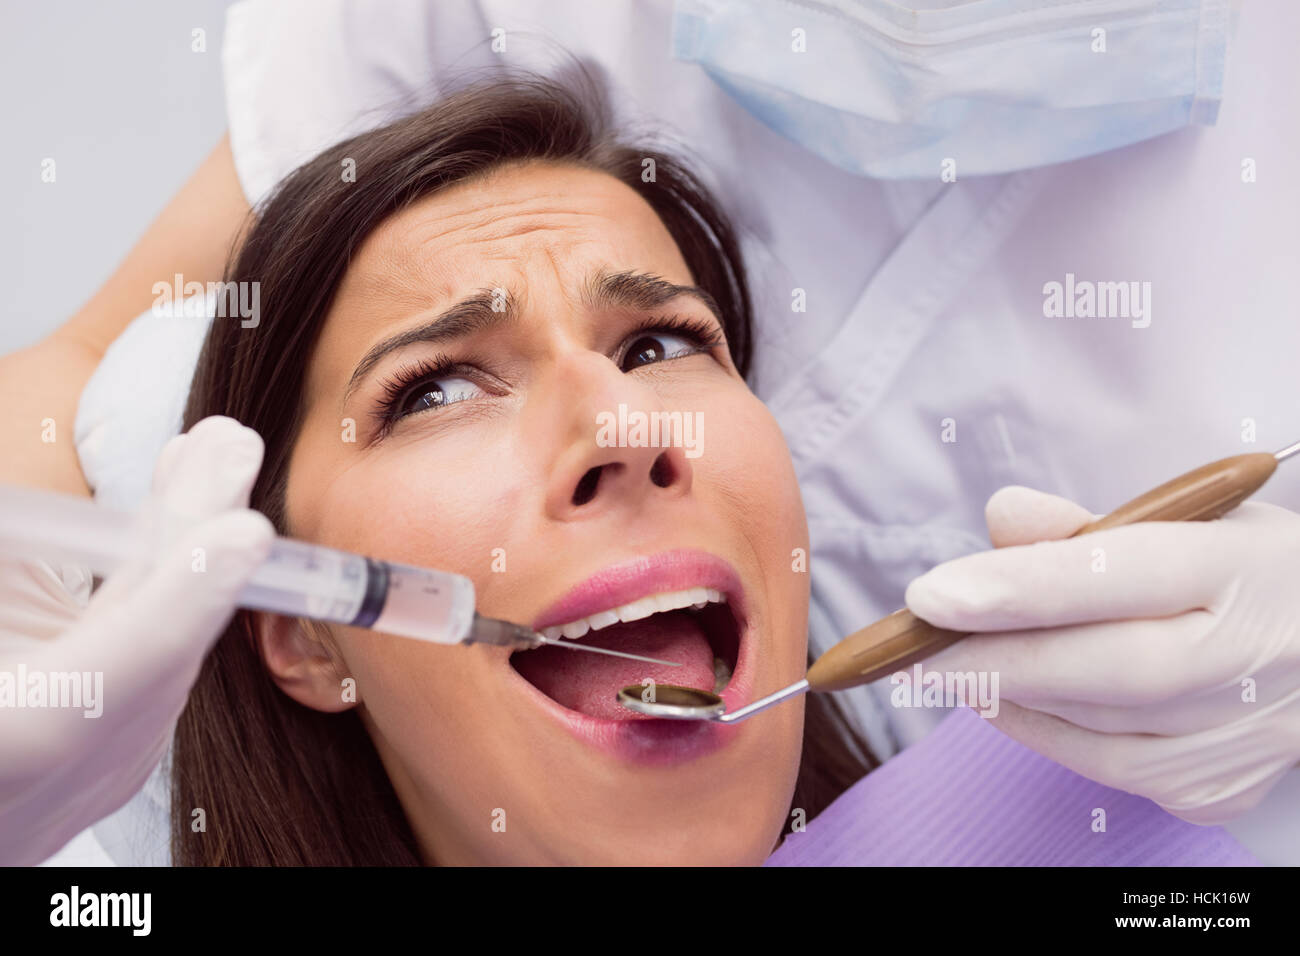 Dentist injecting anesthetics in scared female patient mouth Stock Photo